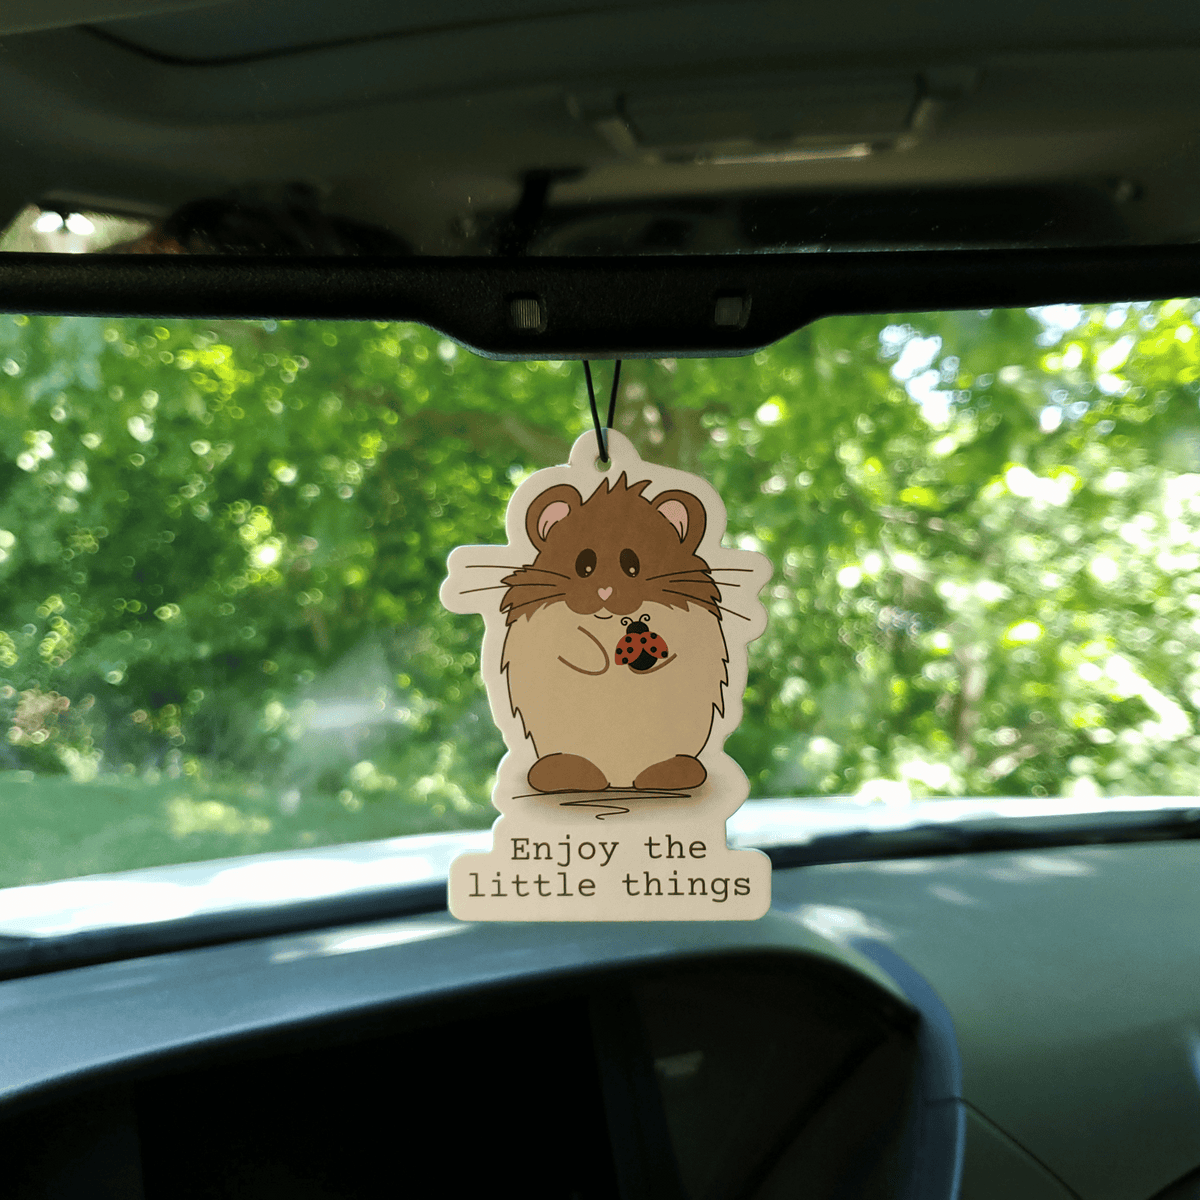 Wild Strawberry Scented Car Air Freshener with Hamster Artwork to Enjoy the Little Things